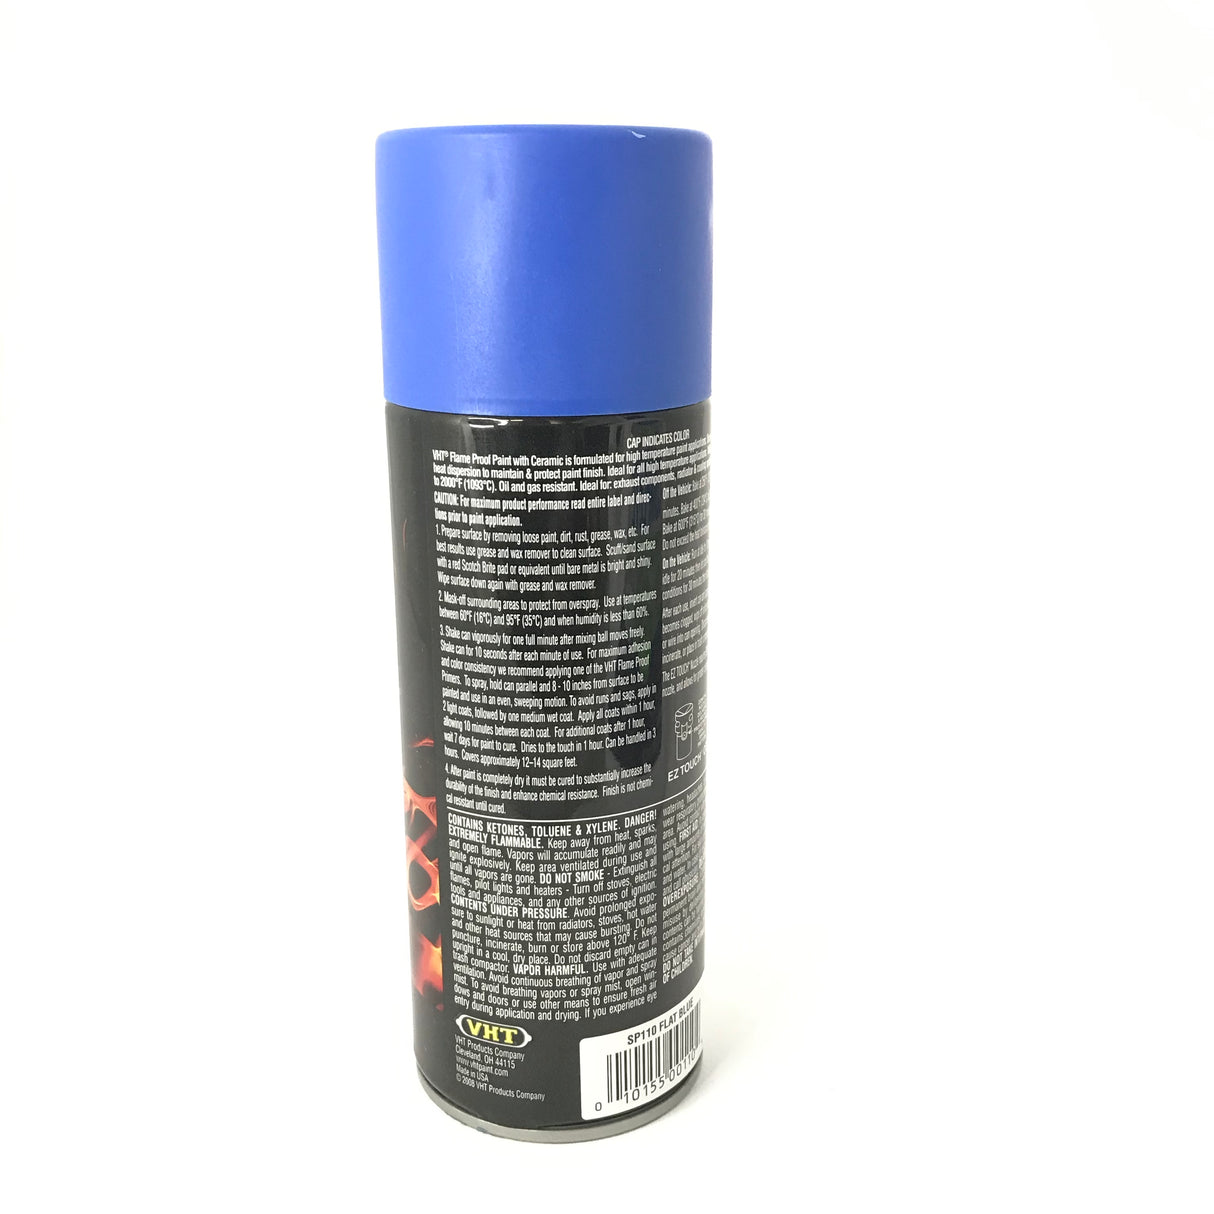 VHT SP110-3 PACK High Temperature Flame Proof FLAT BLUE Header Spray Paint - 11oz